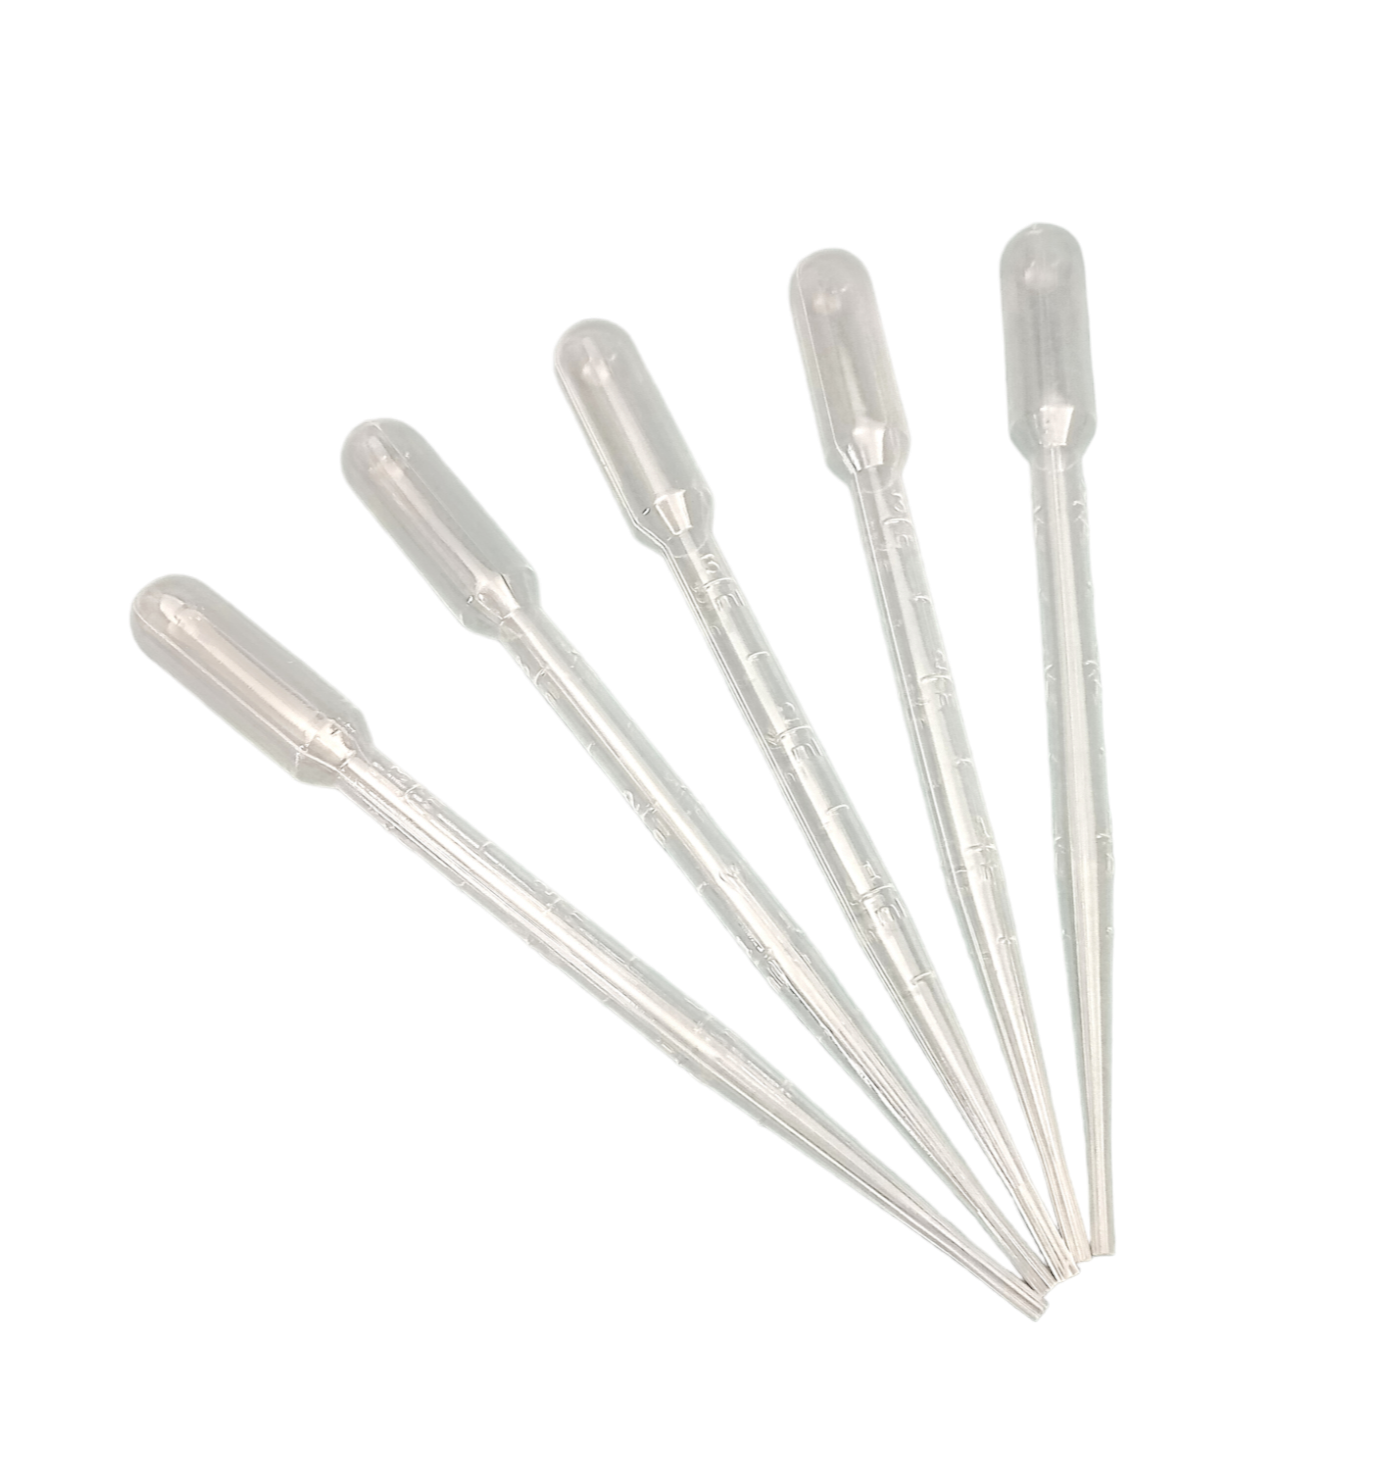 AB130 EXPO PACK OF 5 MEASURING PIPETTES